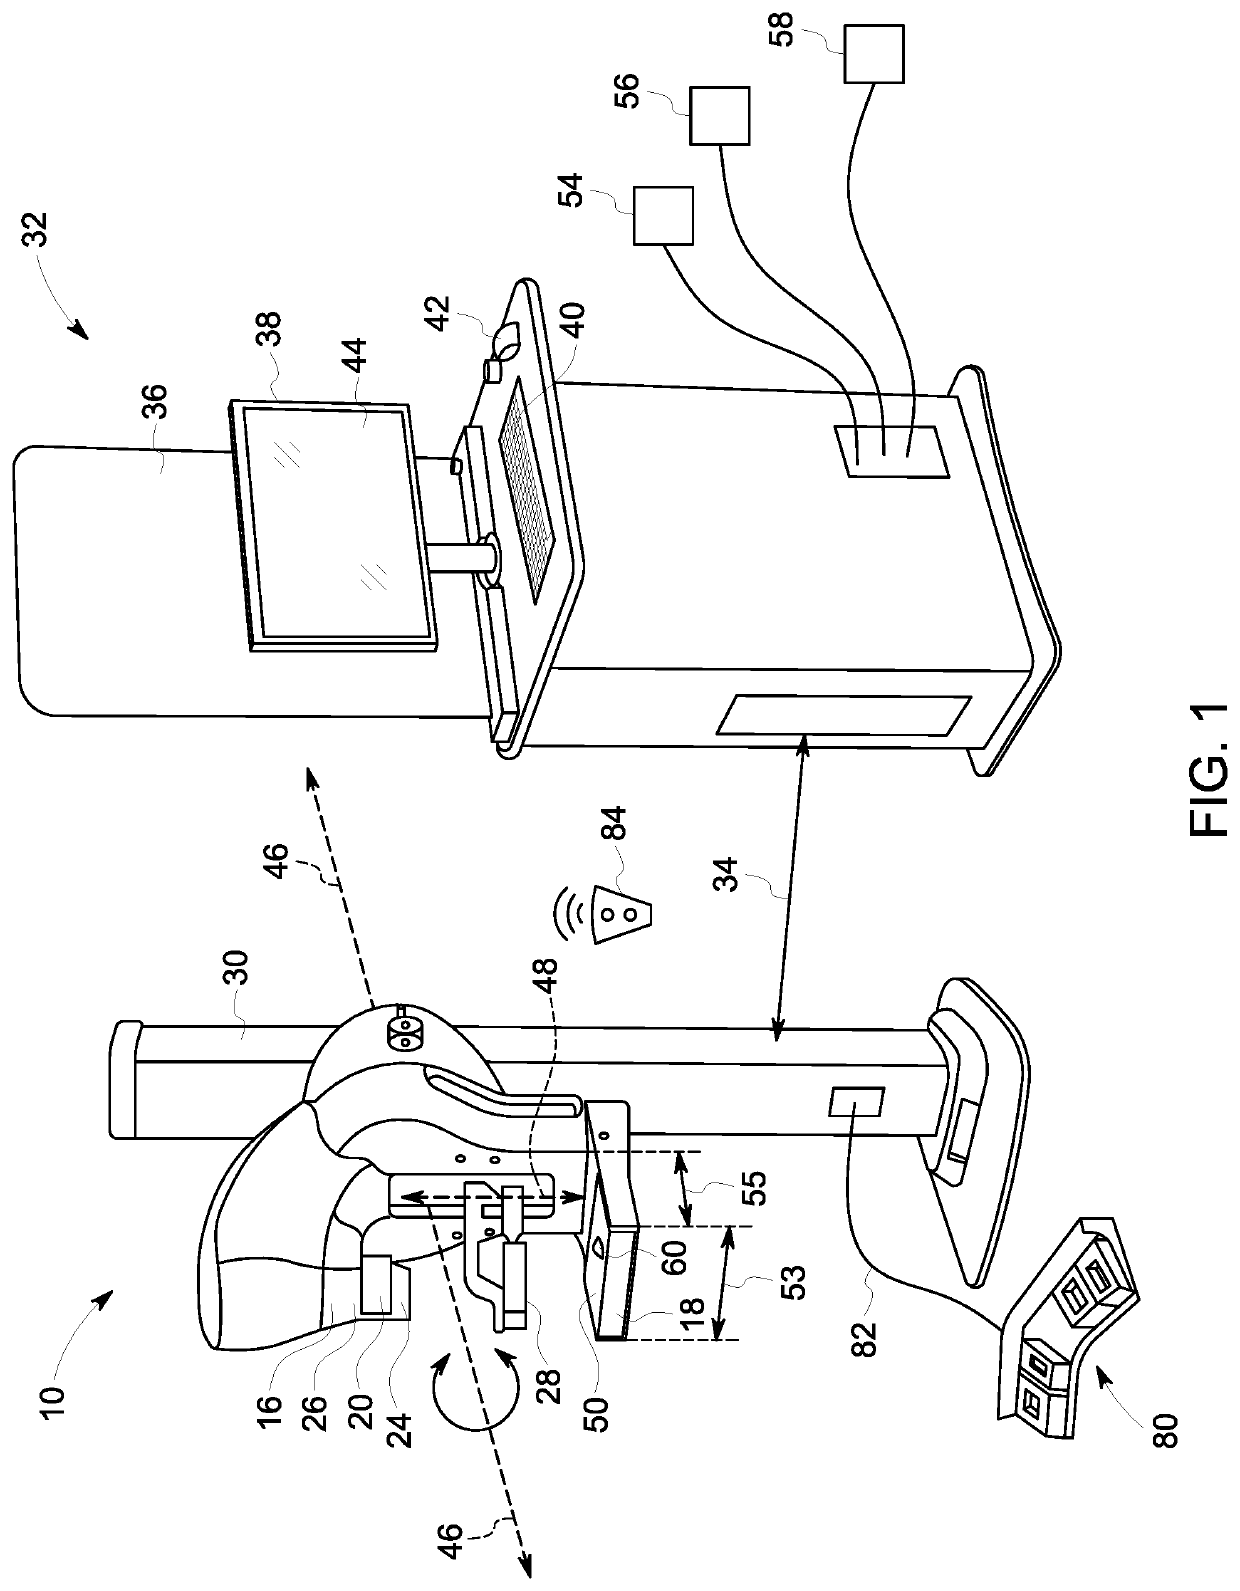 Apparatus and method for mammographic breast compression